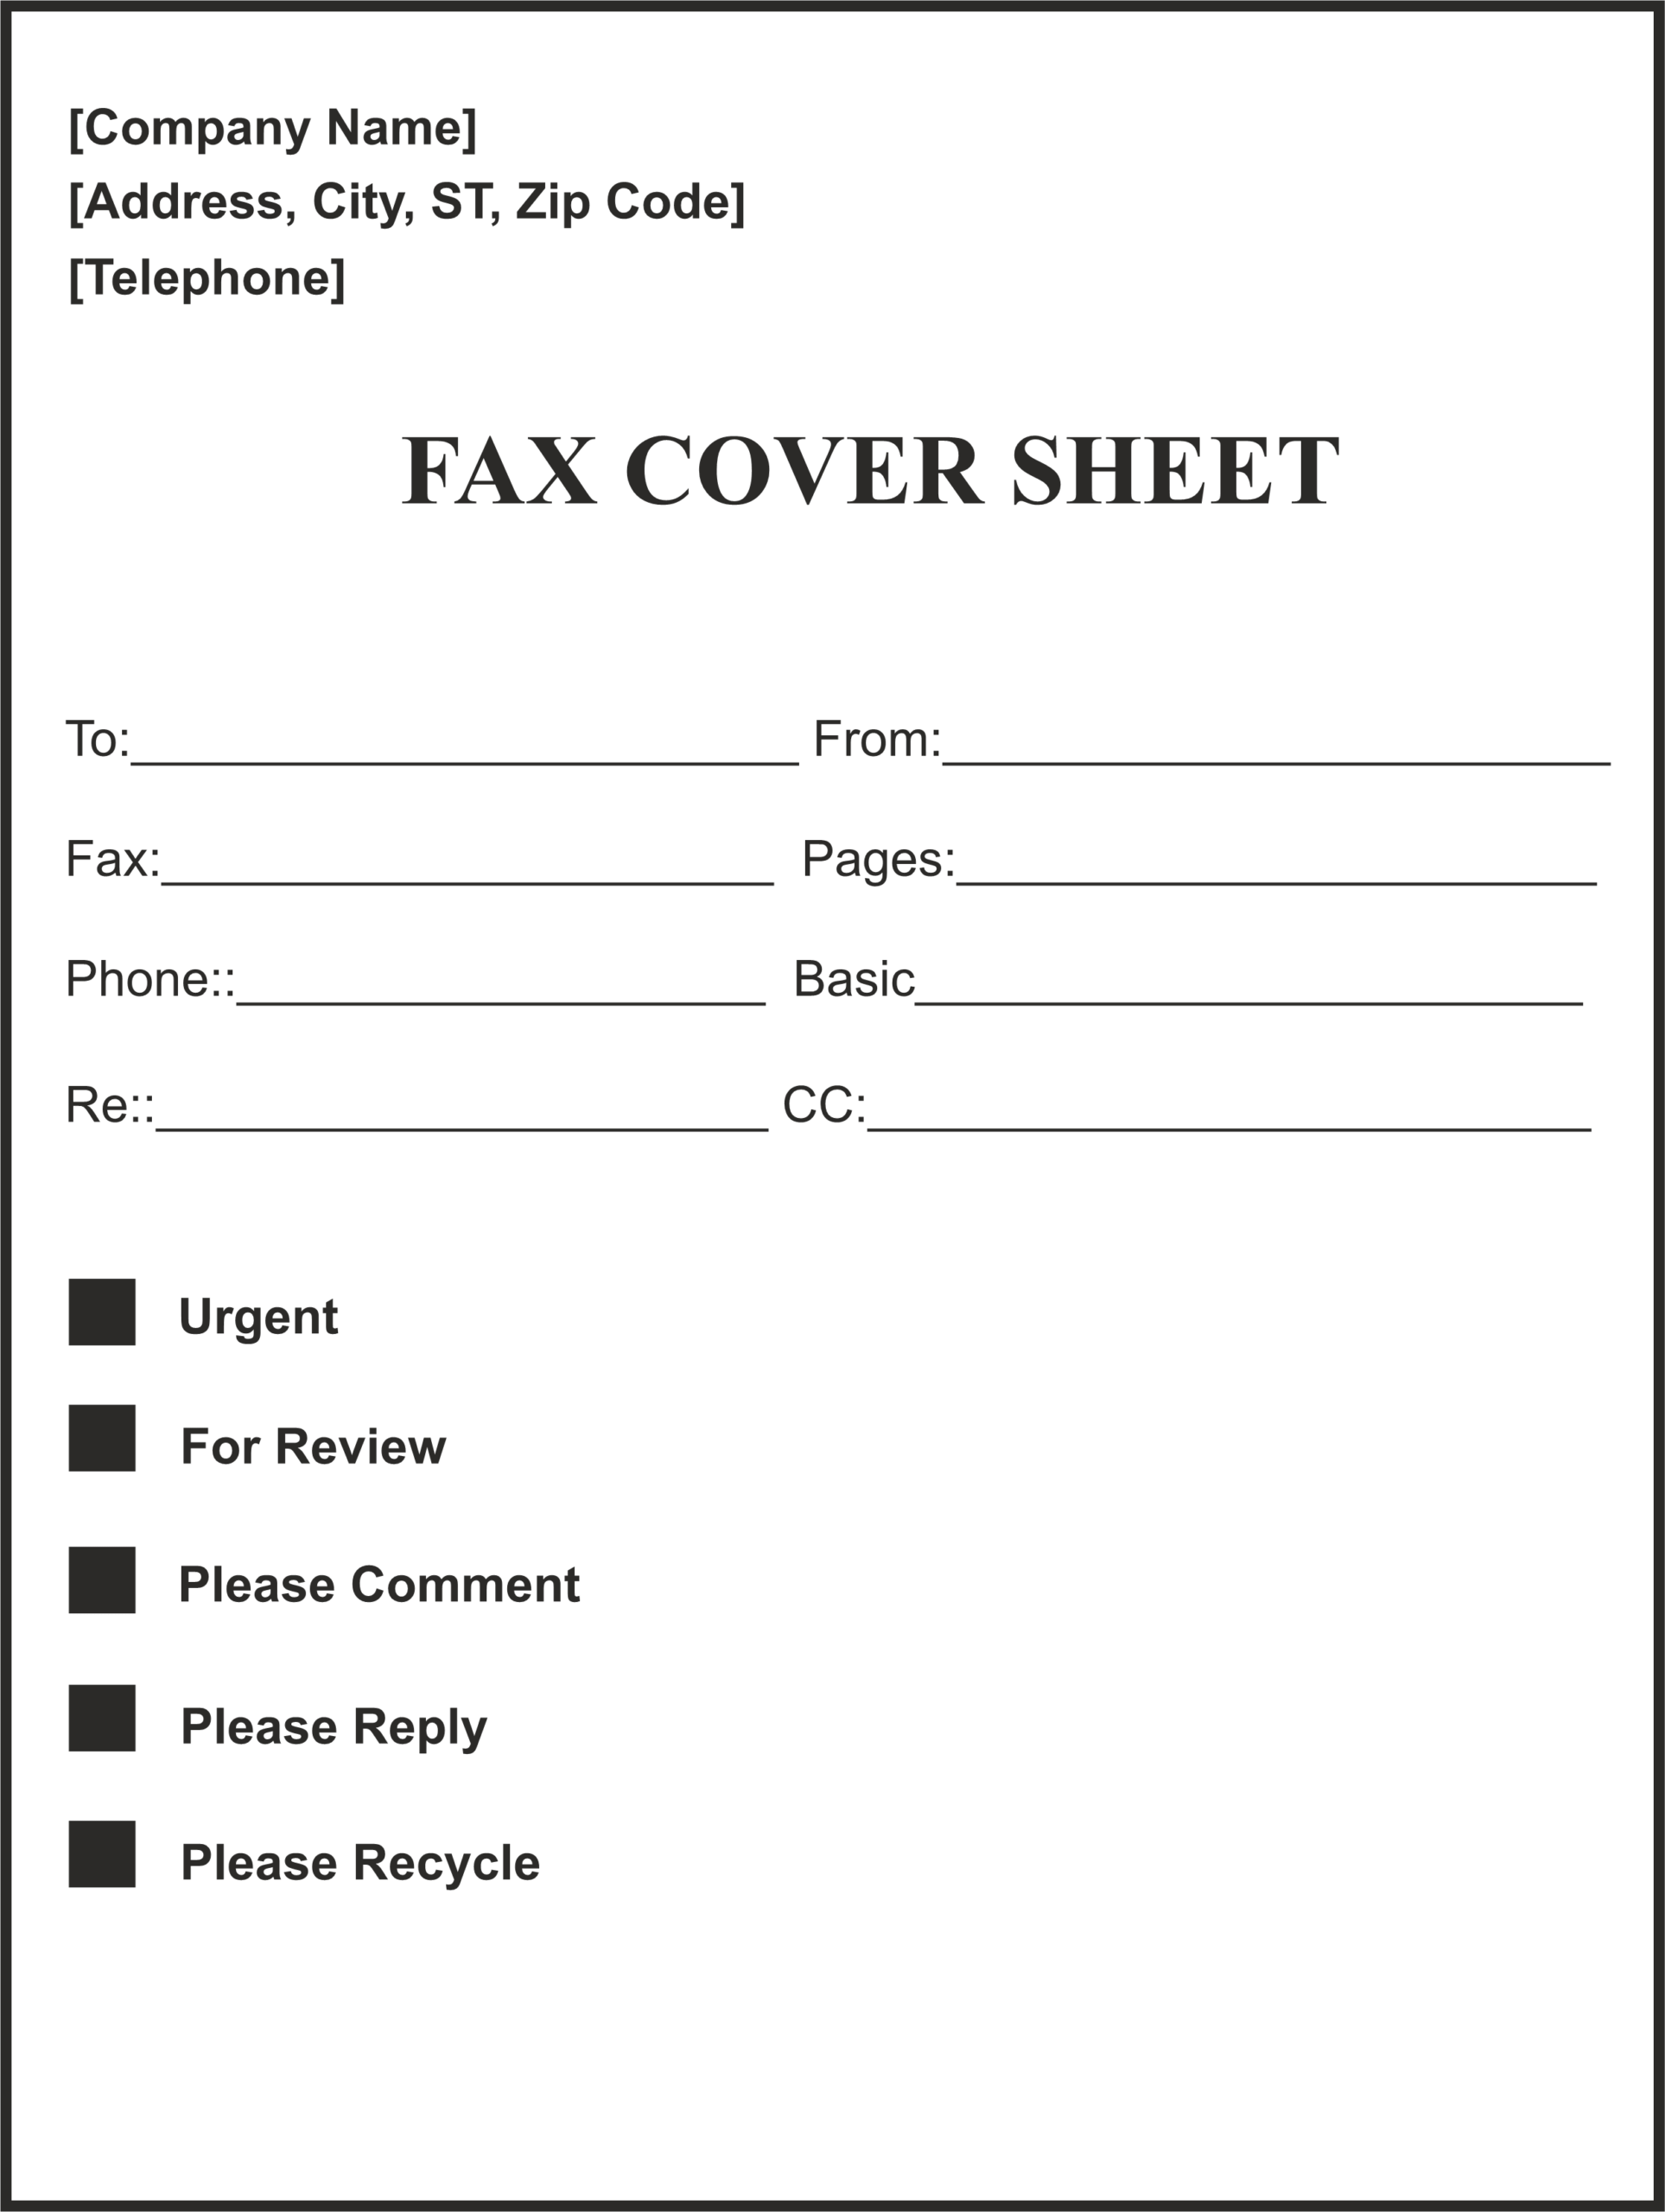 Word Facover Sheets Template Fax Cover Sheet 2013 How To For Fax Cover Sheet Template Word 2010